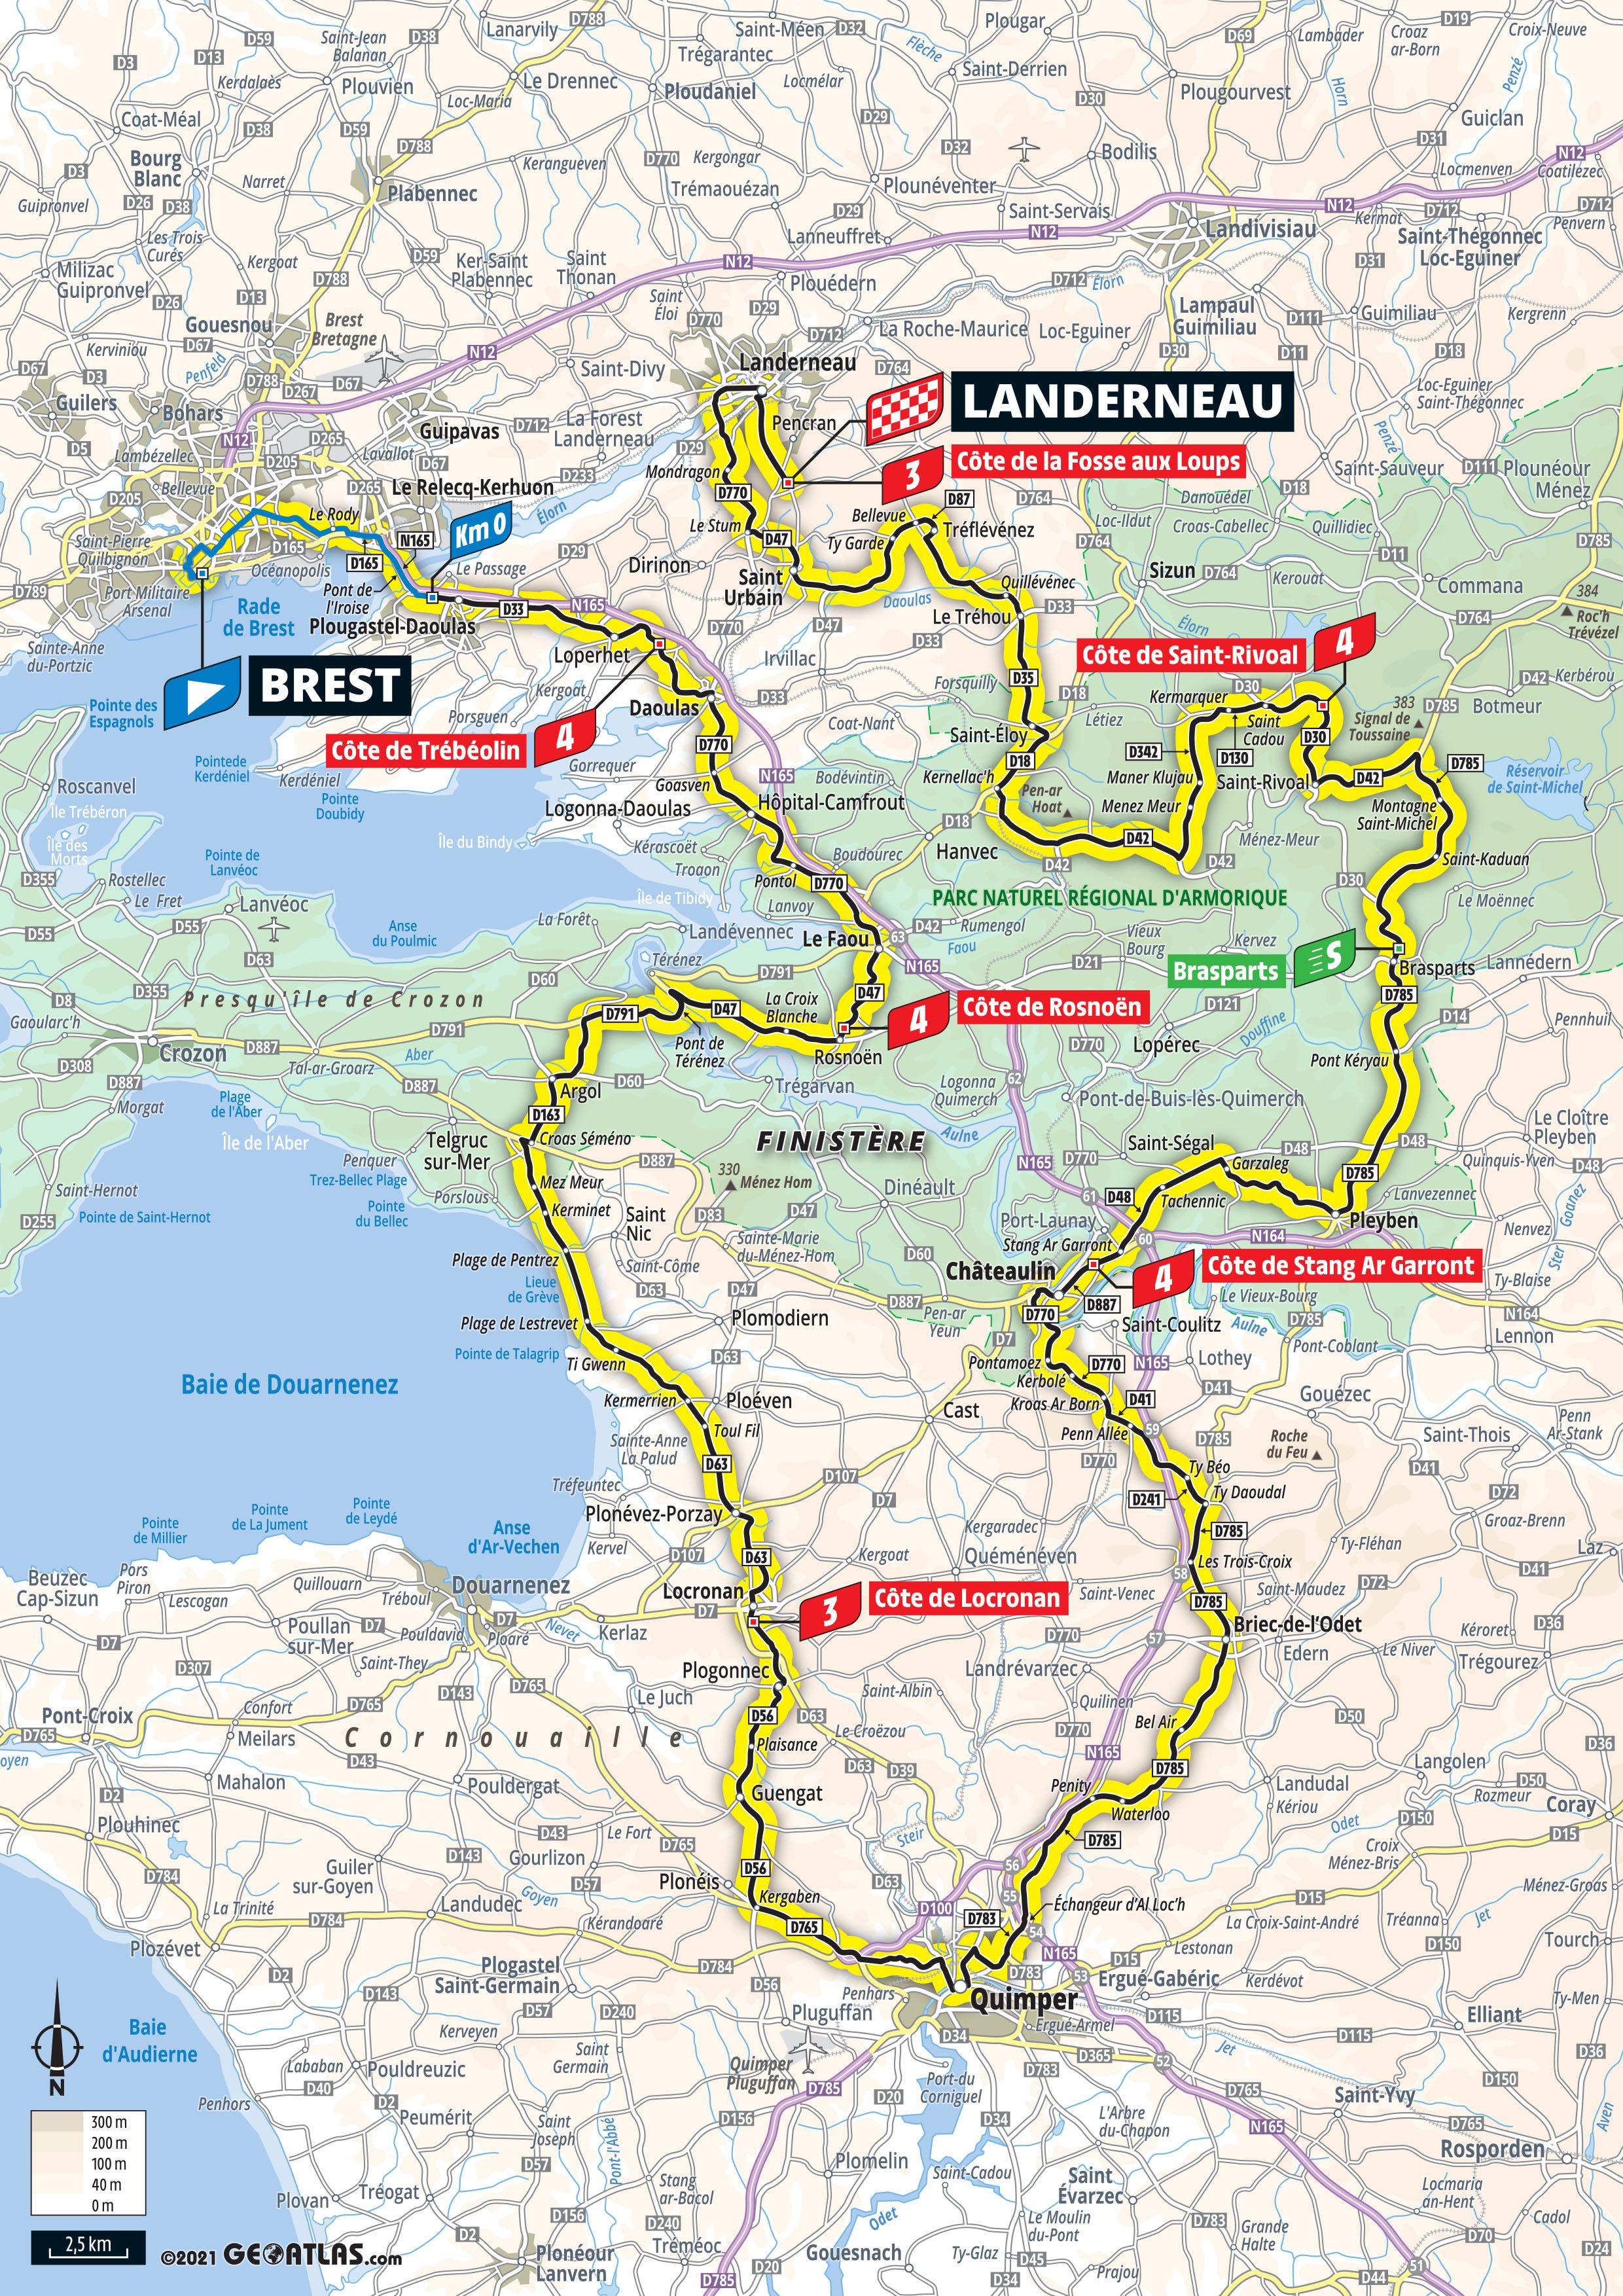 Don't Miss These Six Stages of the Tour de France!